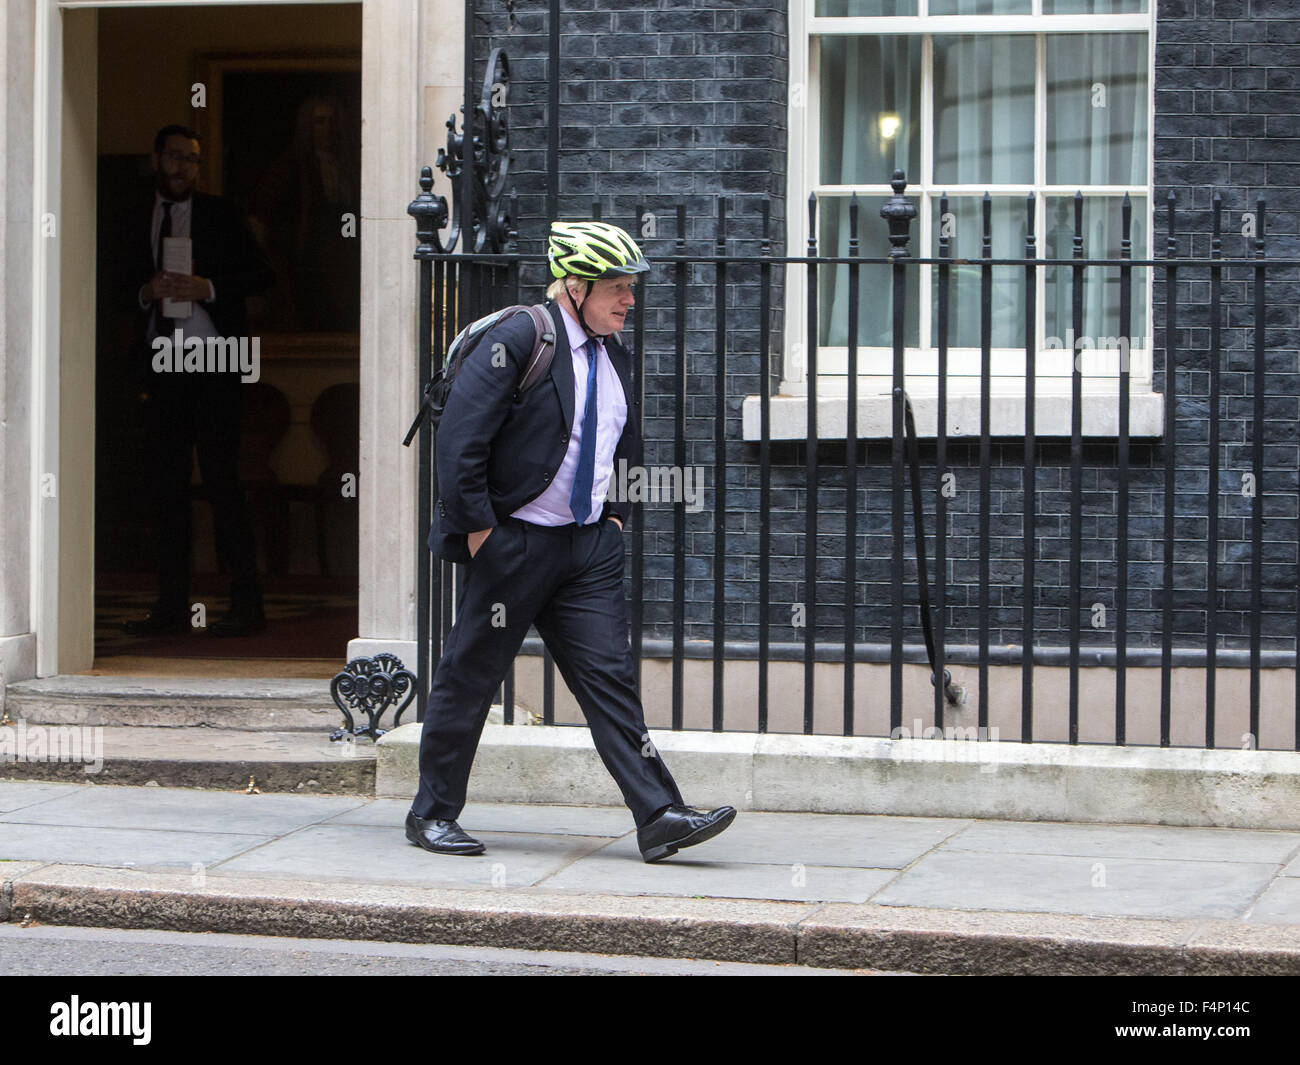 Boris Johnson,Mayor of London,leaves number 10 Downing street after attending a cabinet meeting Stock Photo